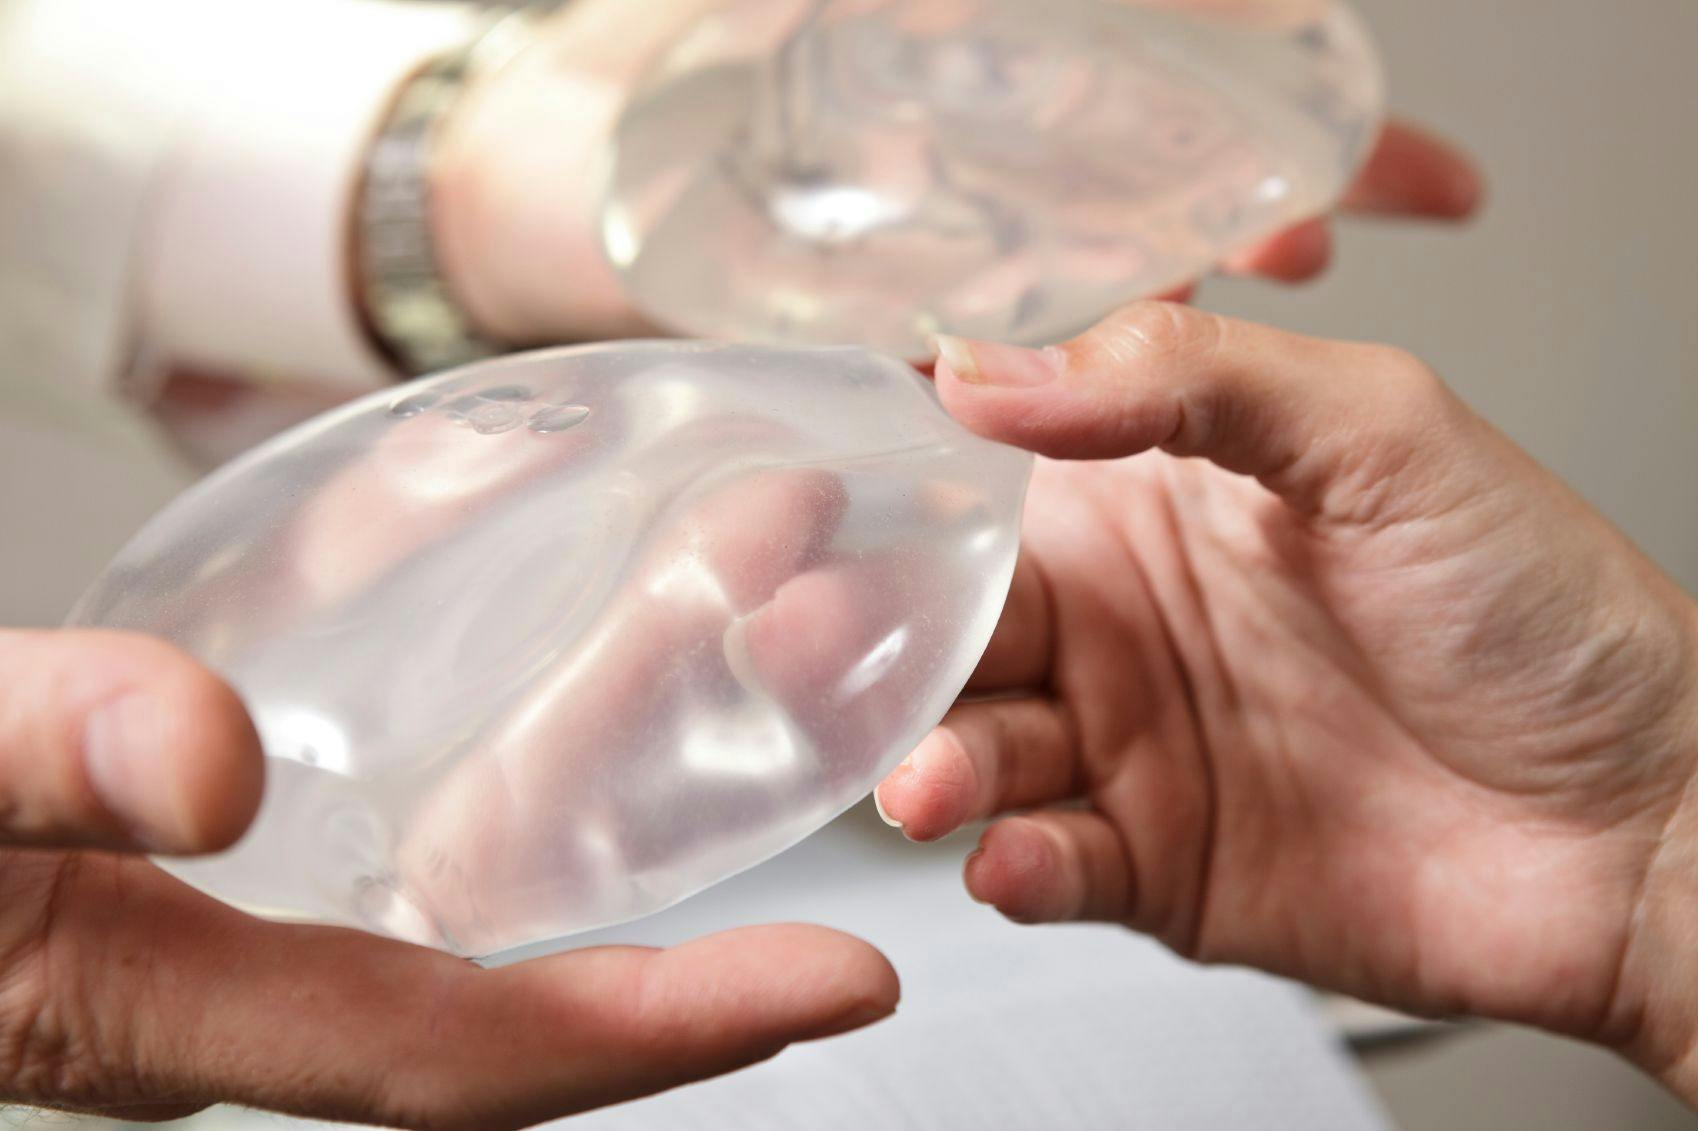 Breast Implants: Is There an Ideal Smoothness to Prevent Immune Reactions?